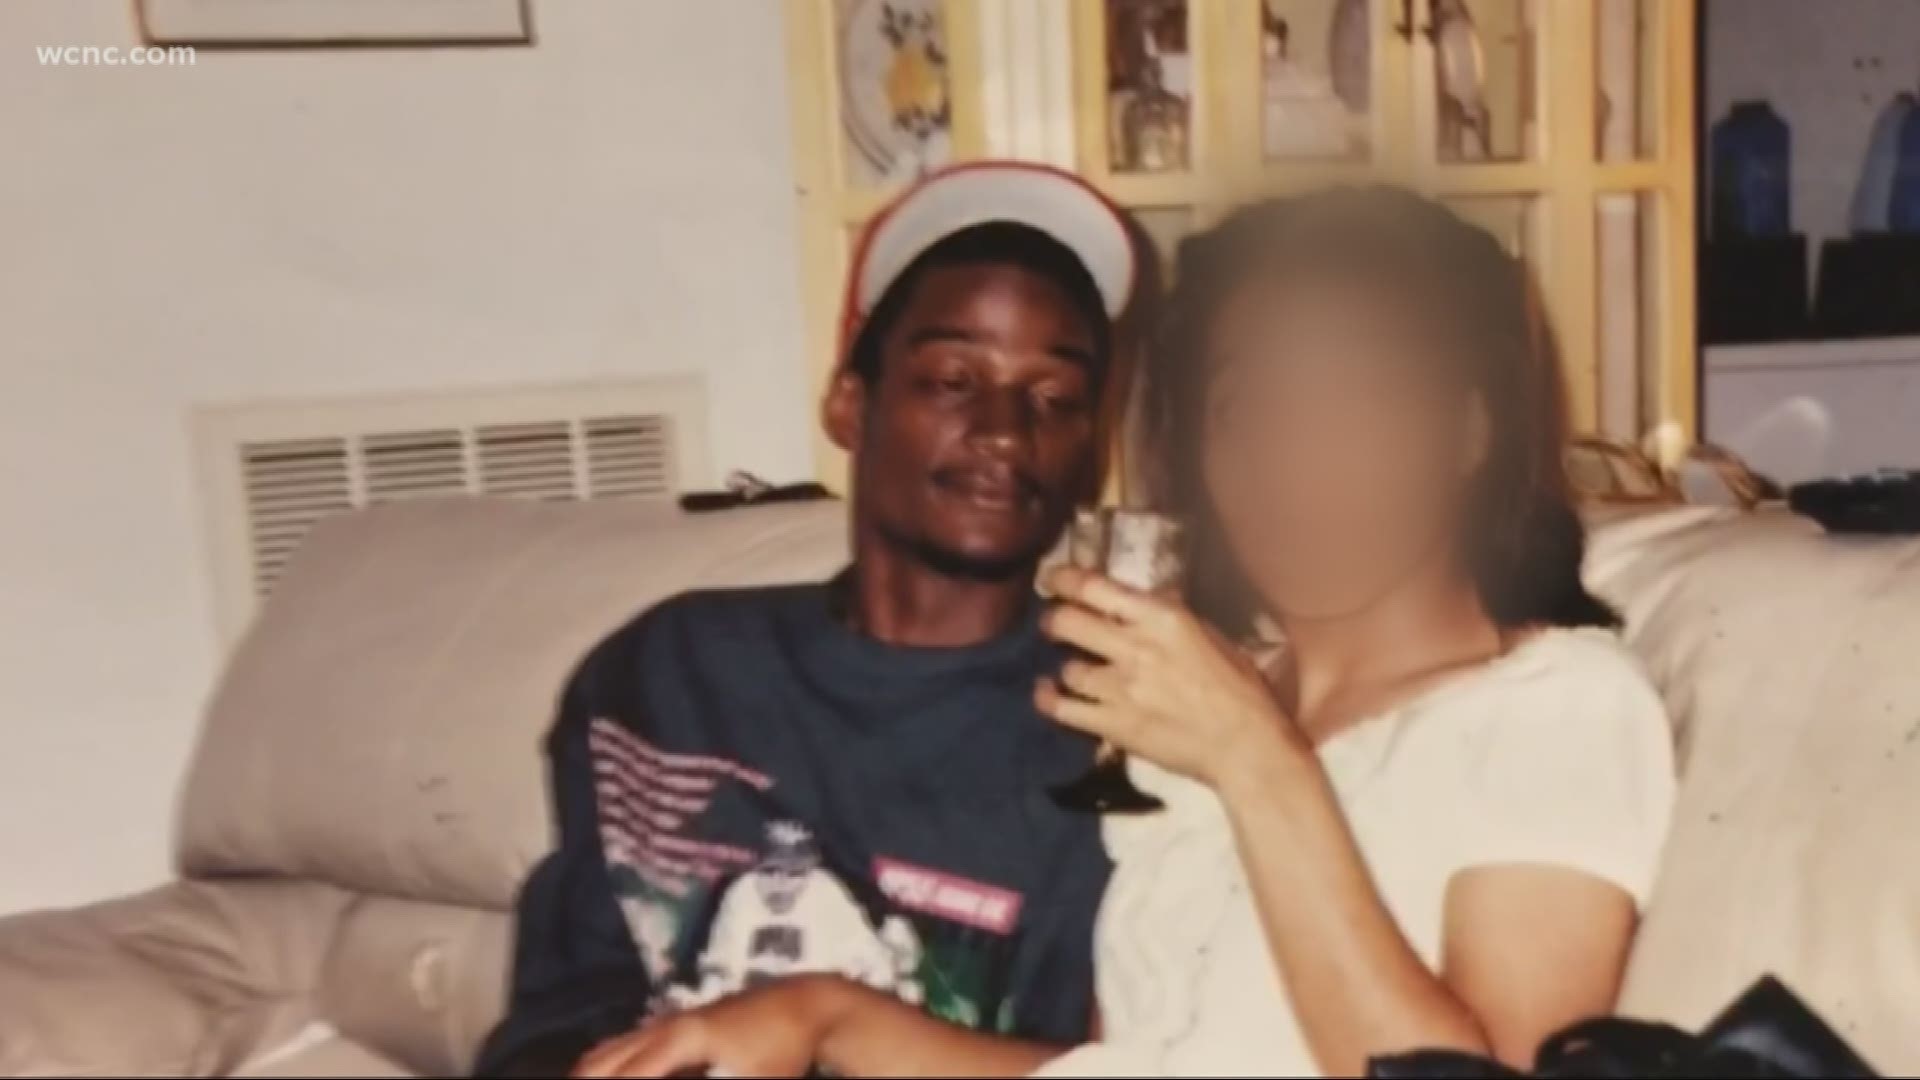 He was gunned down on his way home in 2007 by someone with an assault rifle, and police believe there were witnesses. Yet all these years later, there's never been an arrest in the case.